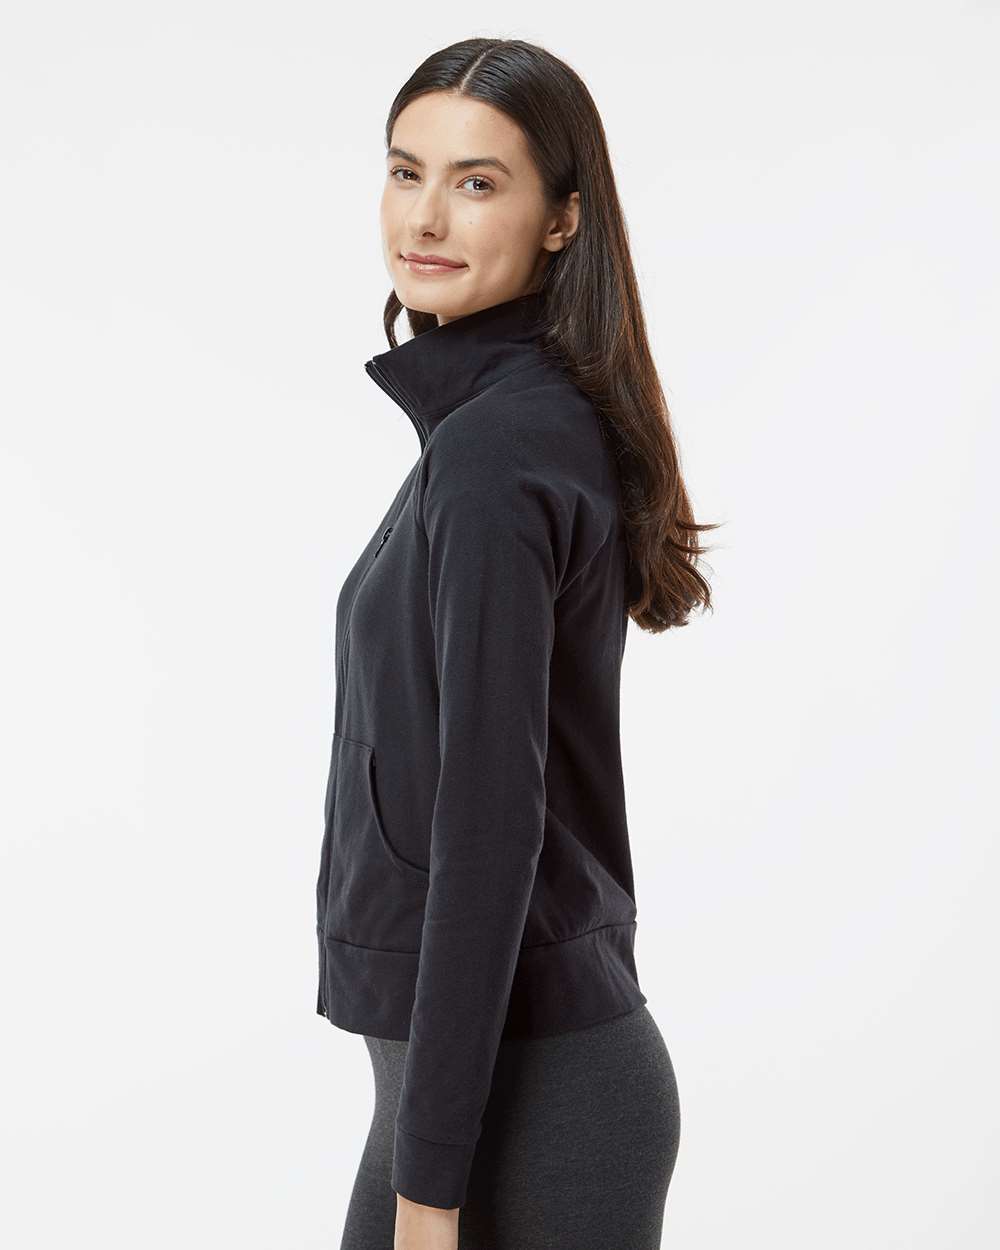 Independent Trading Co. Women's Full-Zip Track Jacket